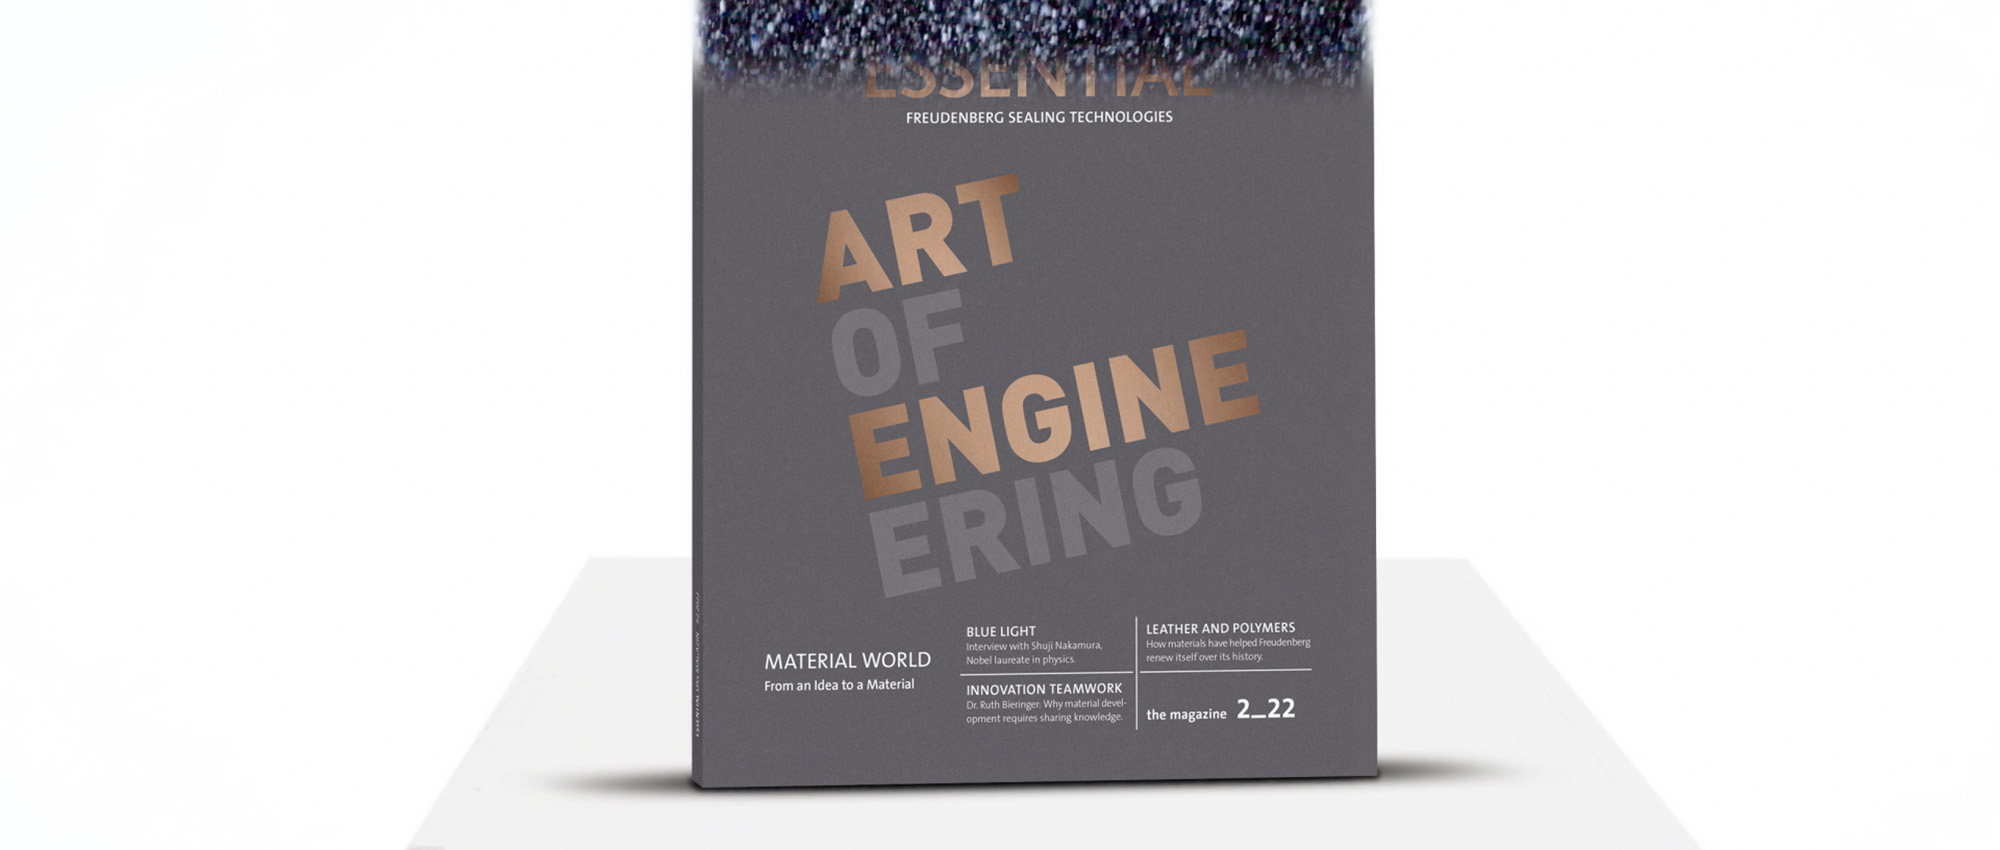 The issue of the Magazine Essential with the inscription Art of Engineering standing on a podium.